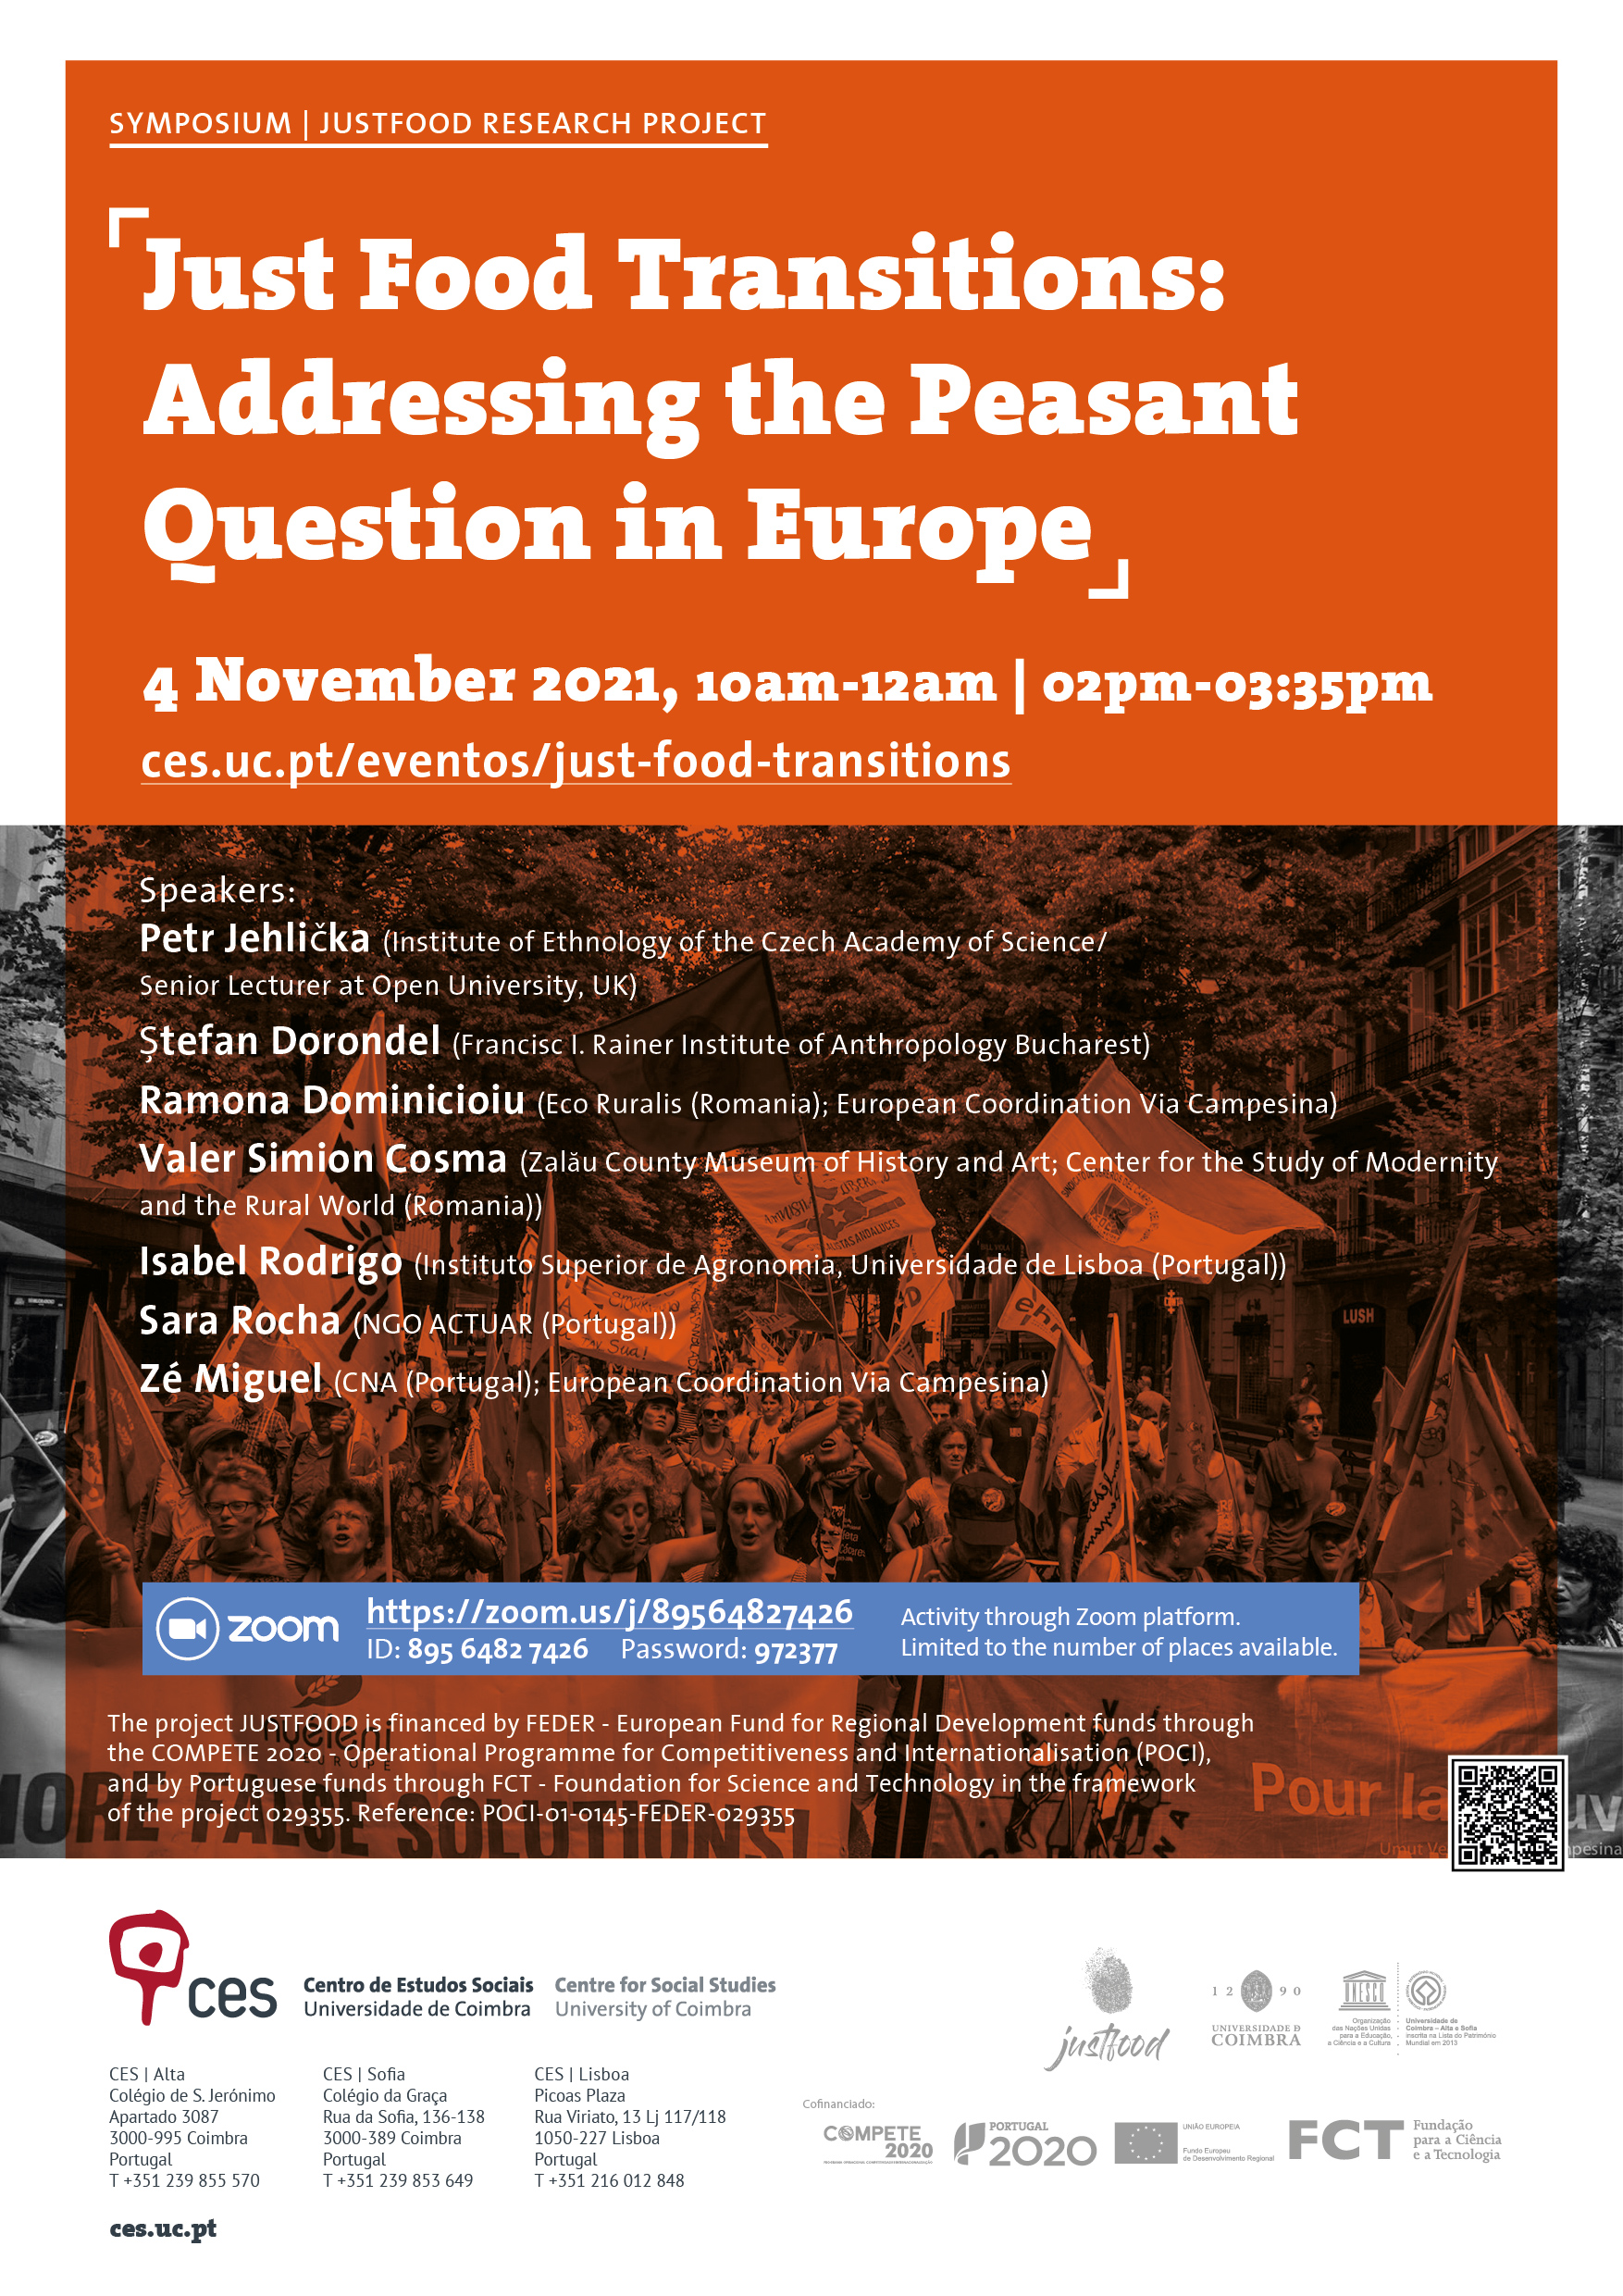 Just Food Transitions: Addressing the Peasant Question in Europe<span id="edit_34372"><script>$(function() { $('#edit_34372').load( "/myces/user/editobj.php?tipo=evento&id=34372" ); });</script></span>